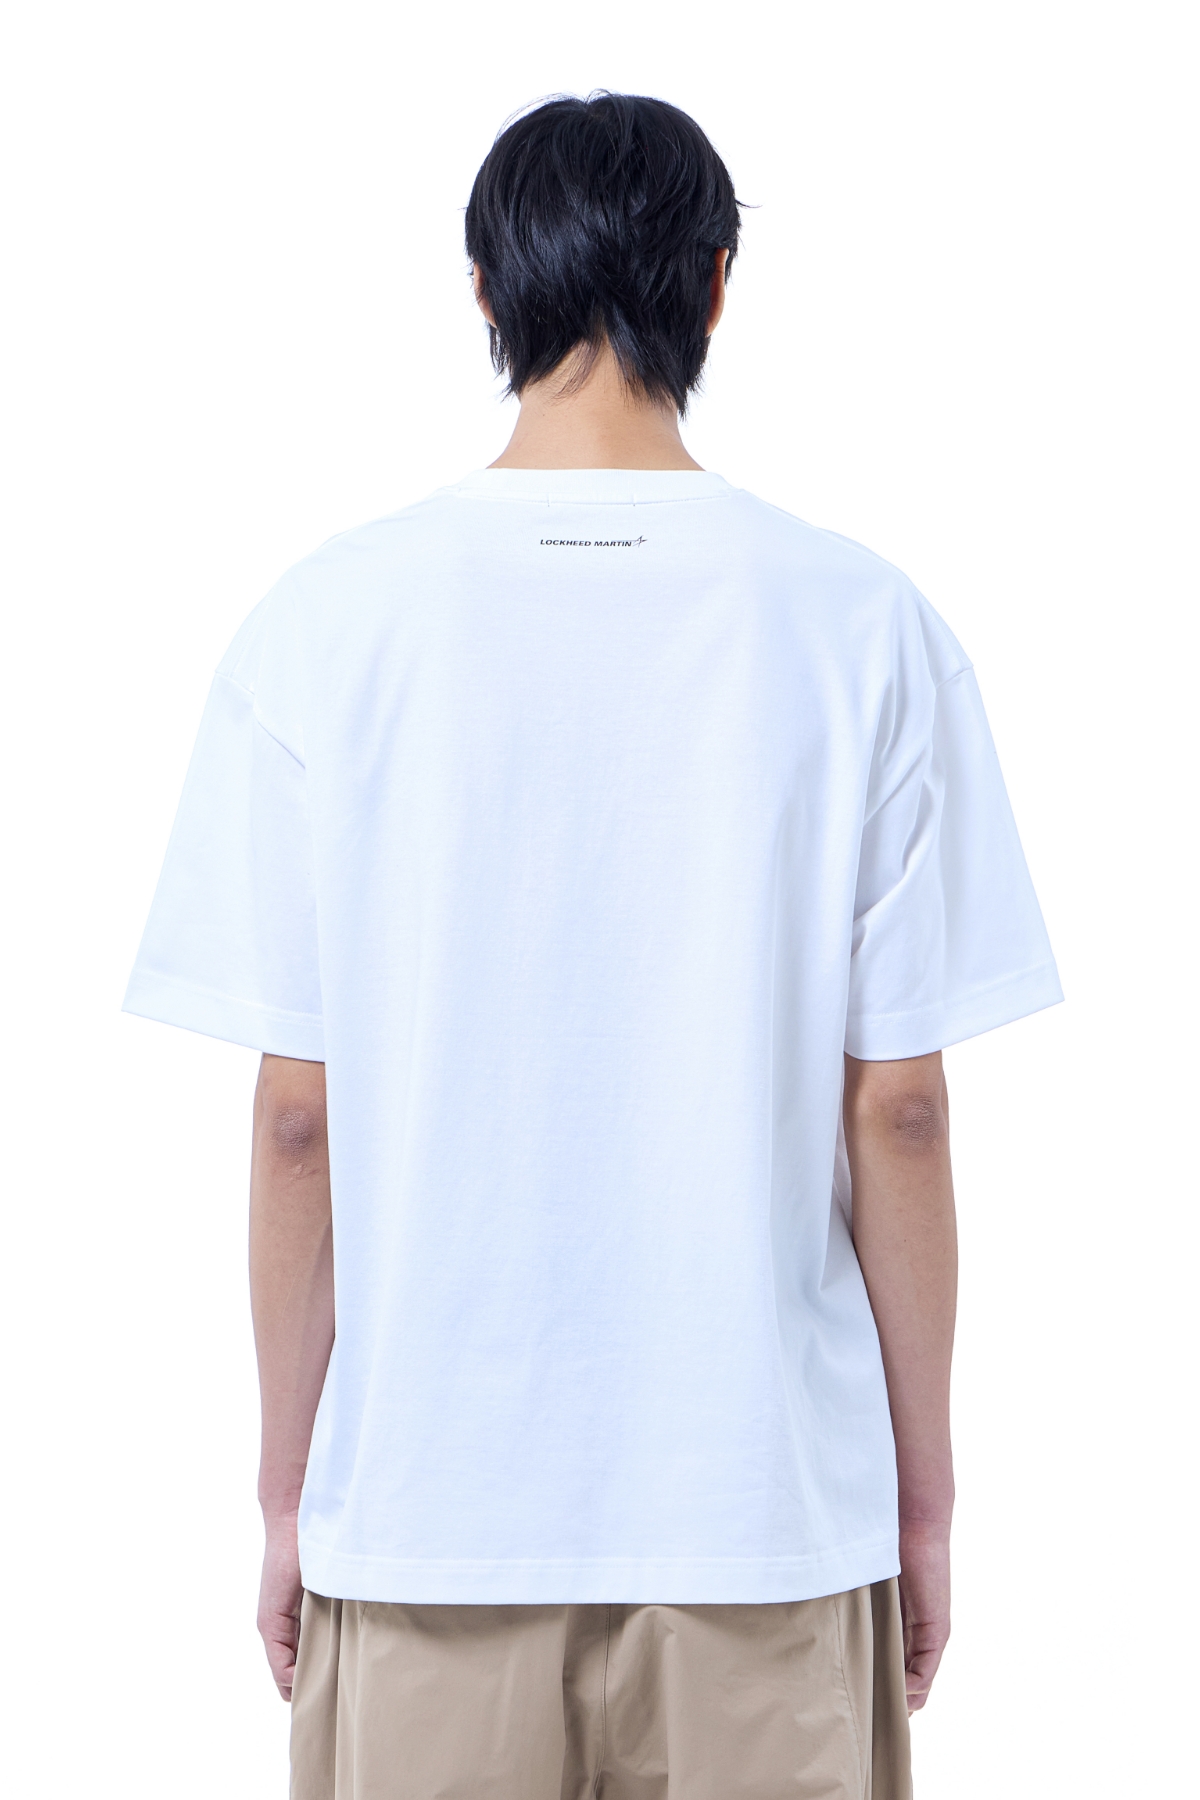 LM F-35 ARCH GRAPHIC T-SHIRT (WHITE)